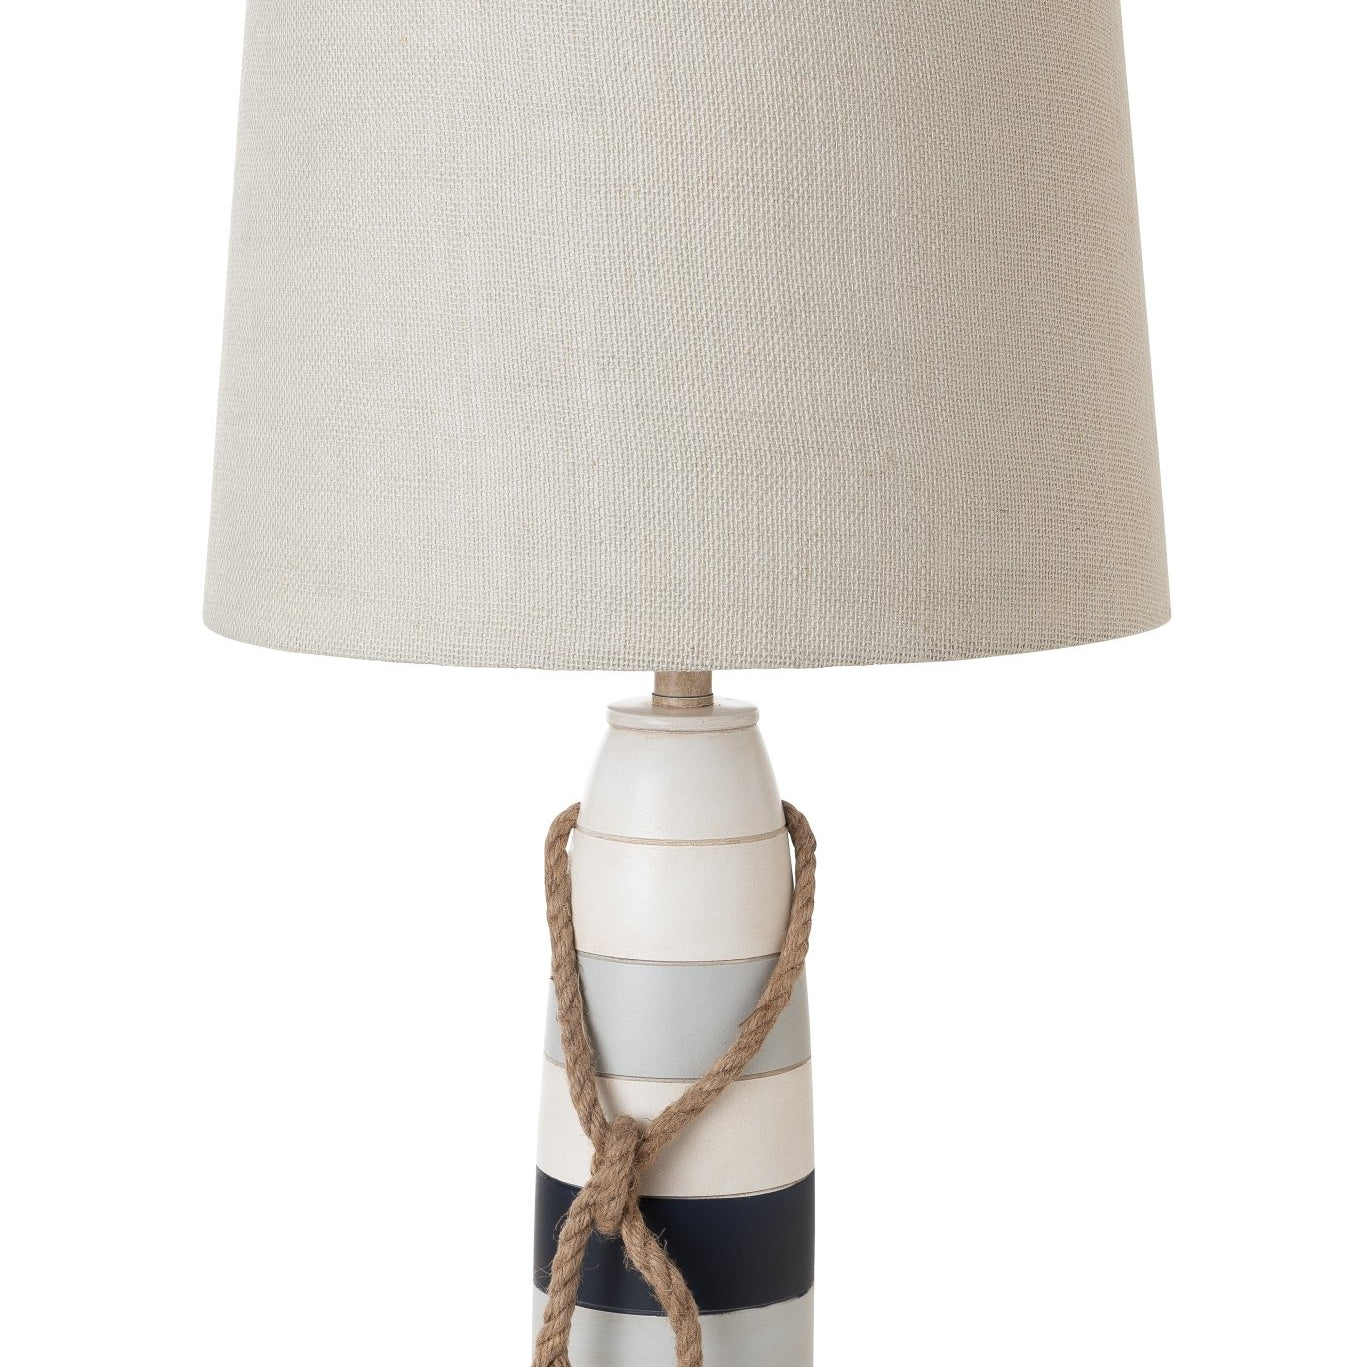 Buoy 27" Poly Coastal Table Lamp, Tri-color, (Set of 2) - Table Lamps